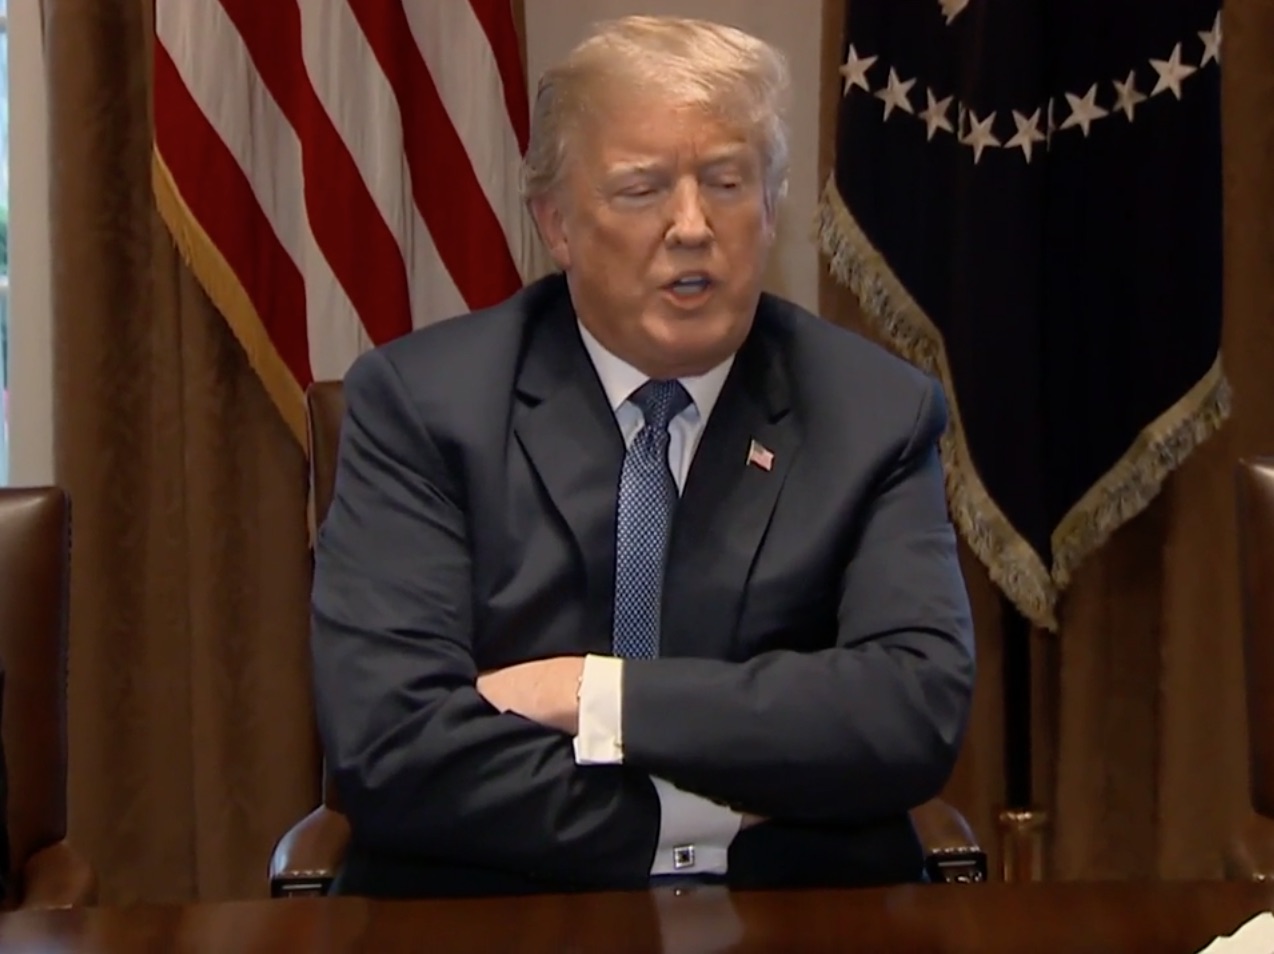 The Donald with crossed arms